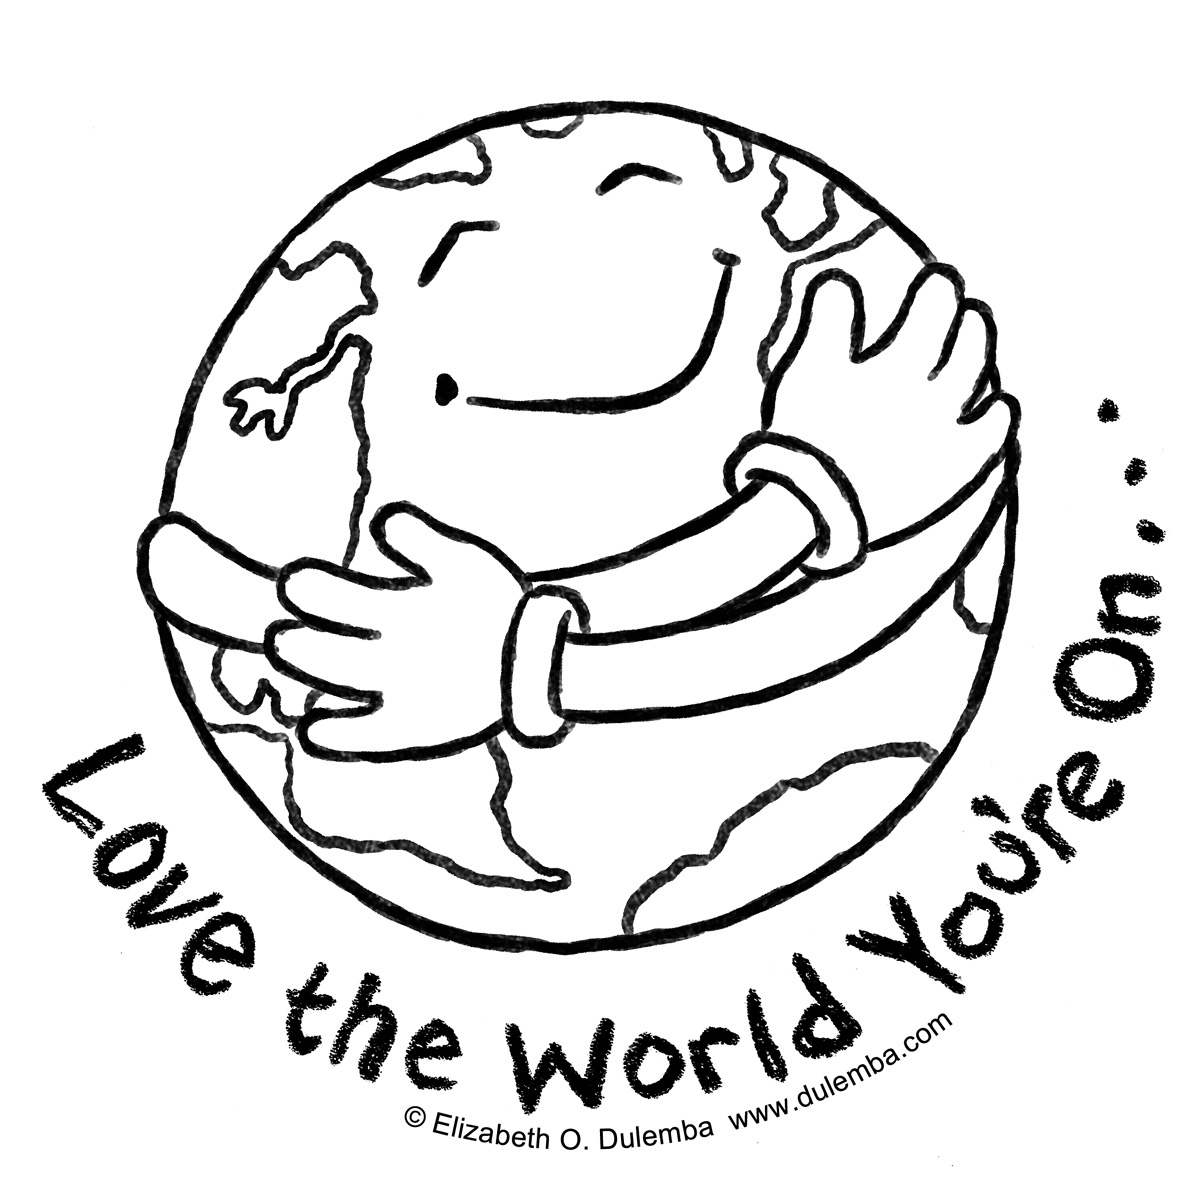  Earth Day Coloring Pages | FREE Coloring pages | #12